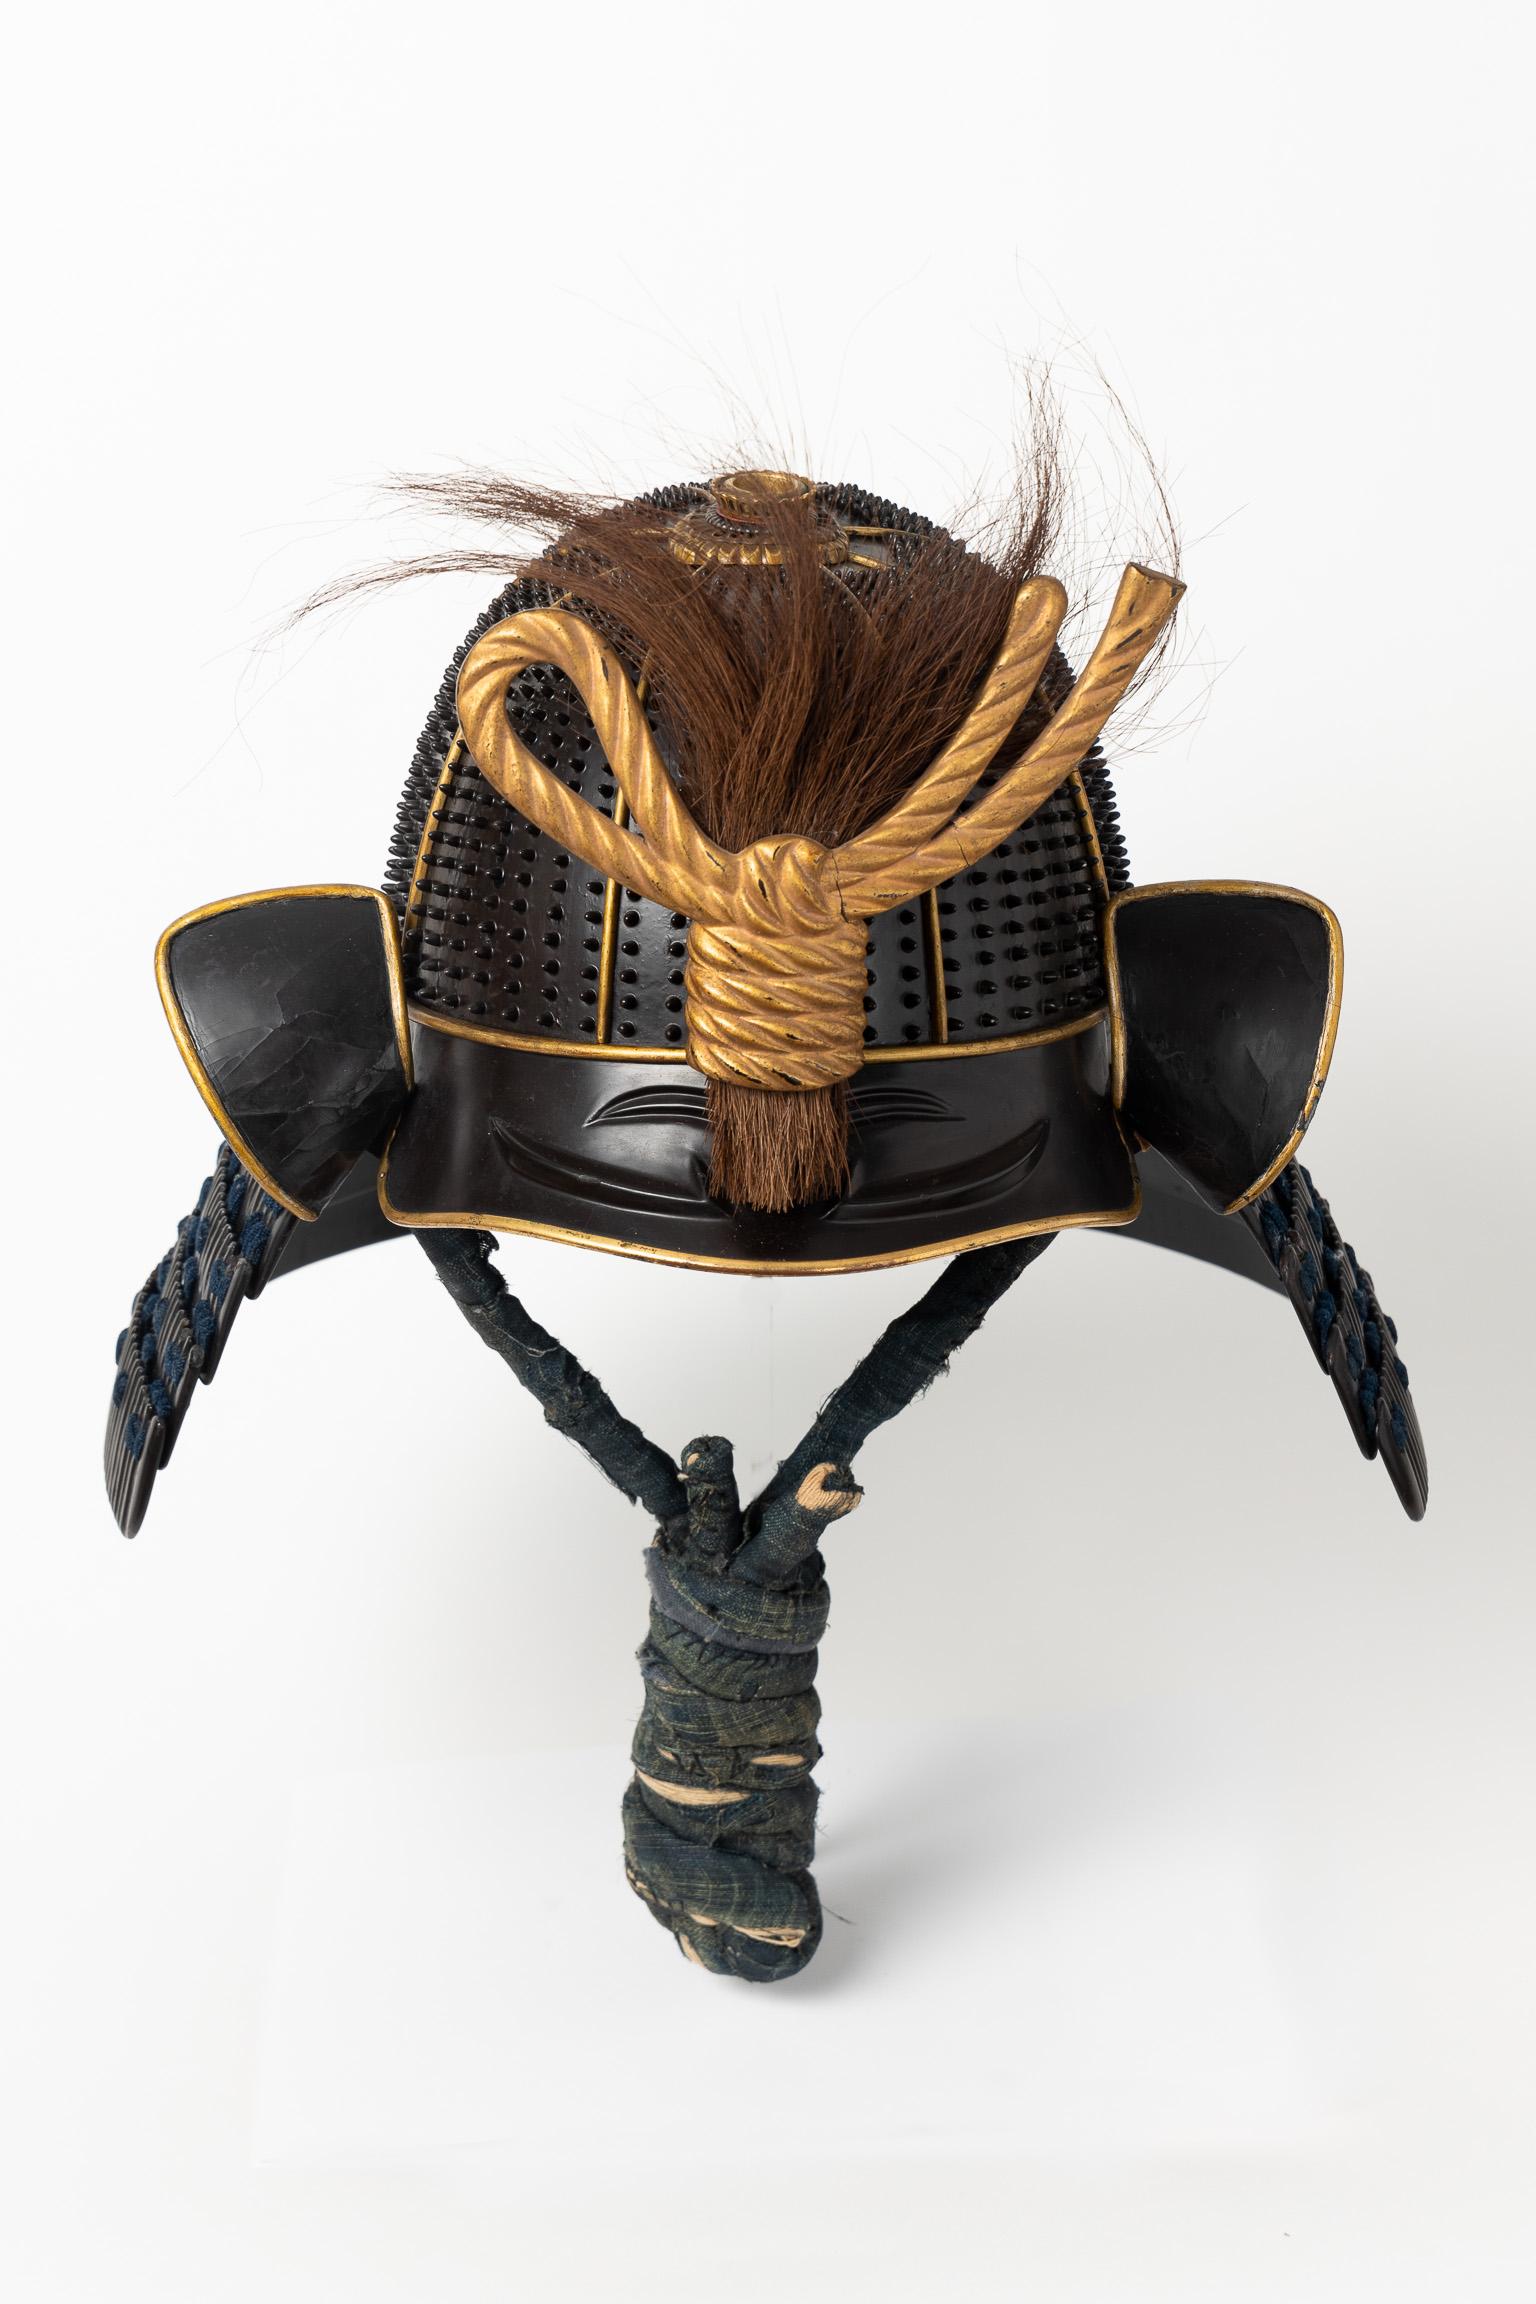 Koboshi kabuto
Samurai helmet with standing rivets
Mid Edo Period, 18th Century

Rare eight-plate kabuto with seven rows of twenty-five rivets each for a total of 1,400, which get smaller as they get closer to the peak of the helmet. The plates'